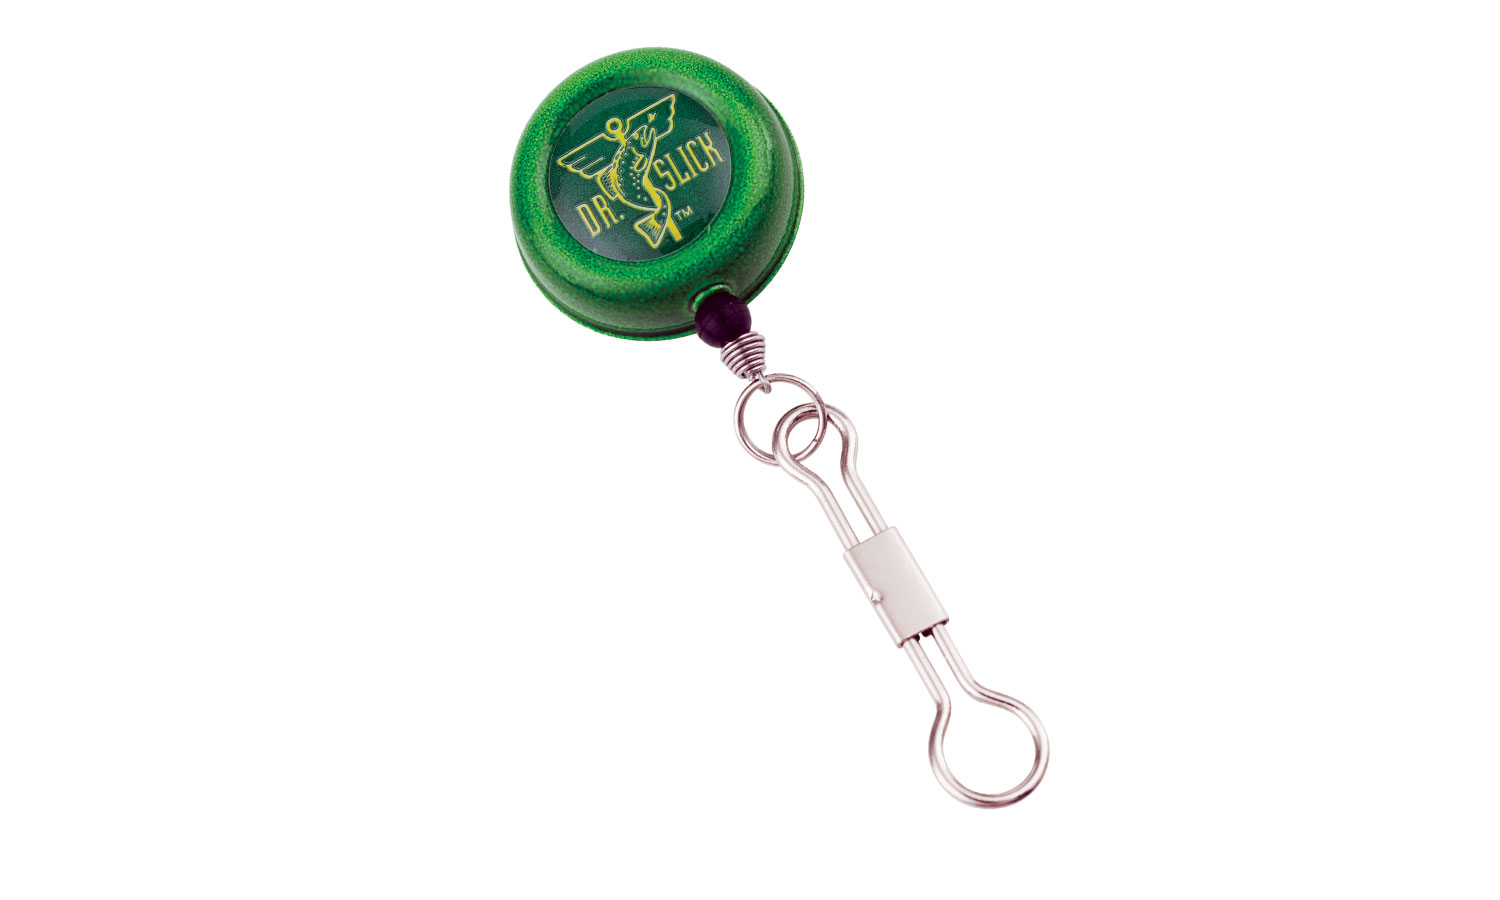 Fly Fishing Nippers with Retractor